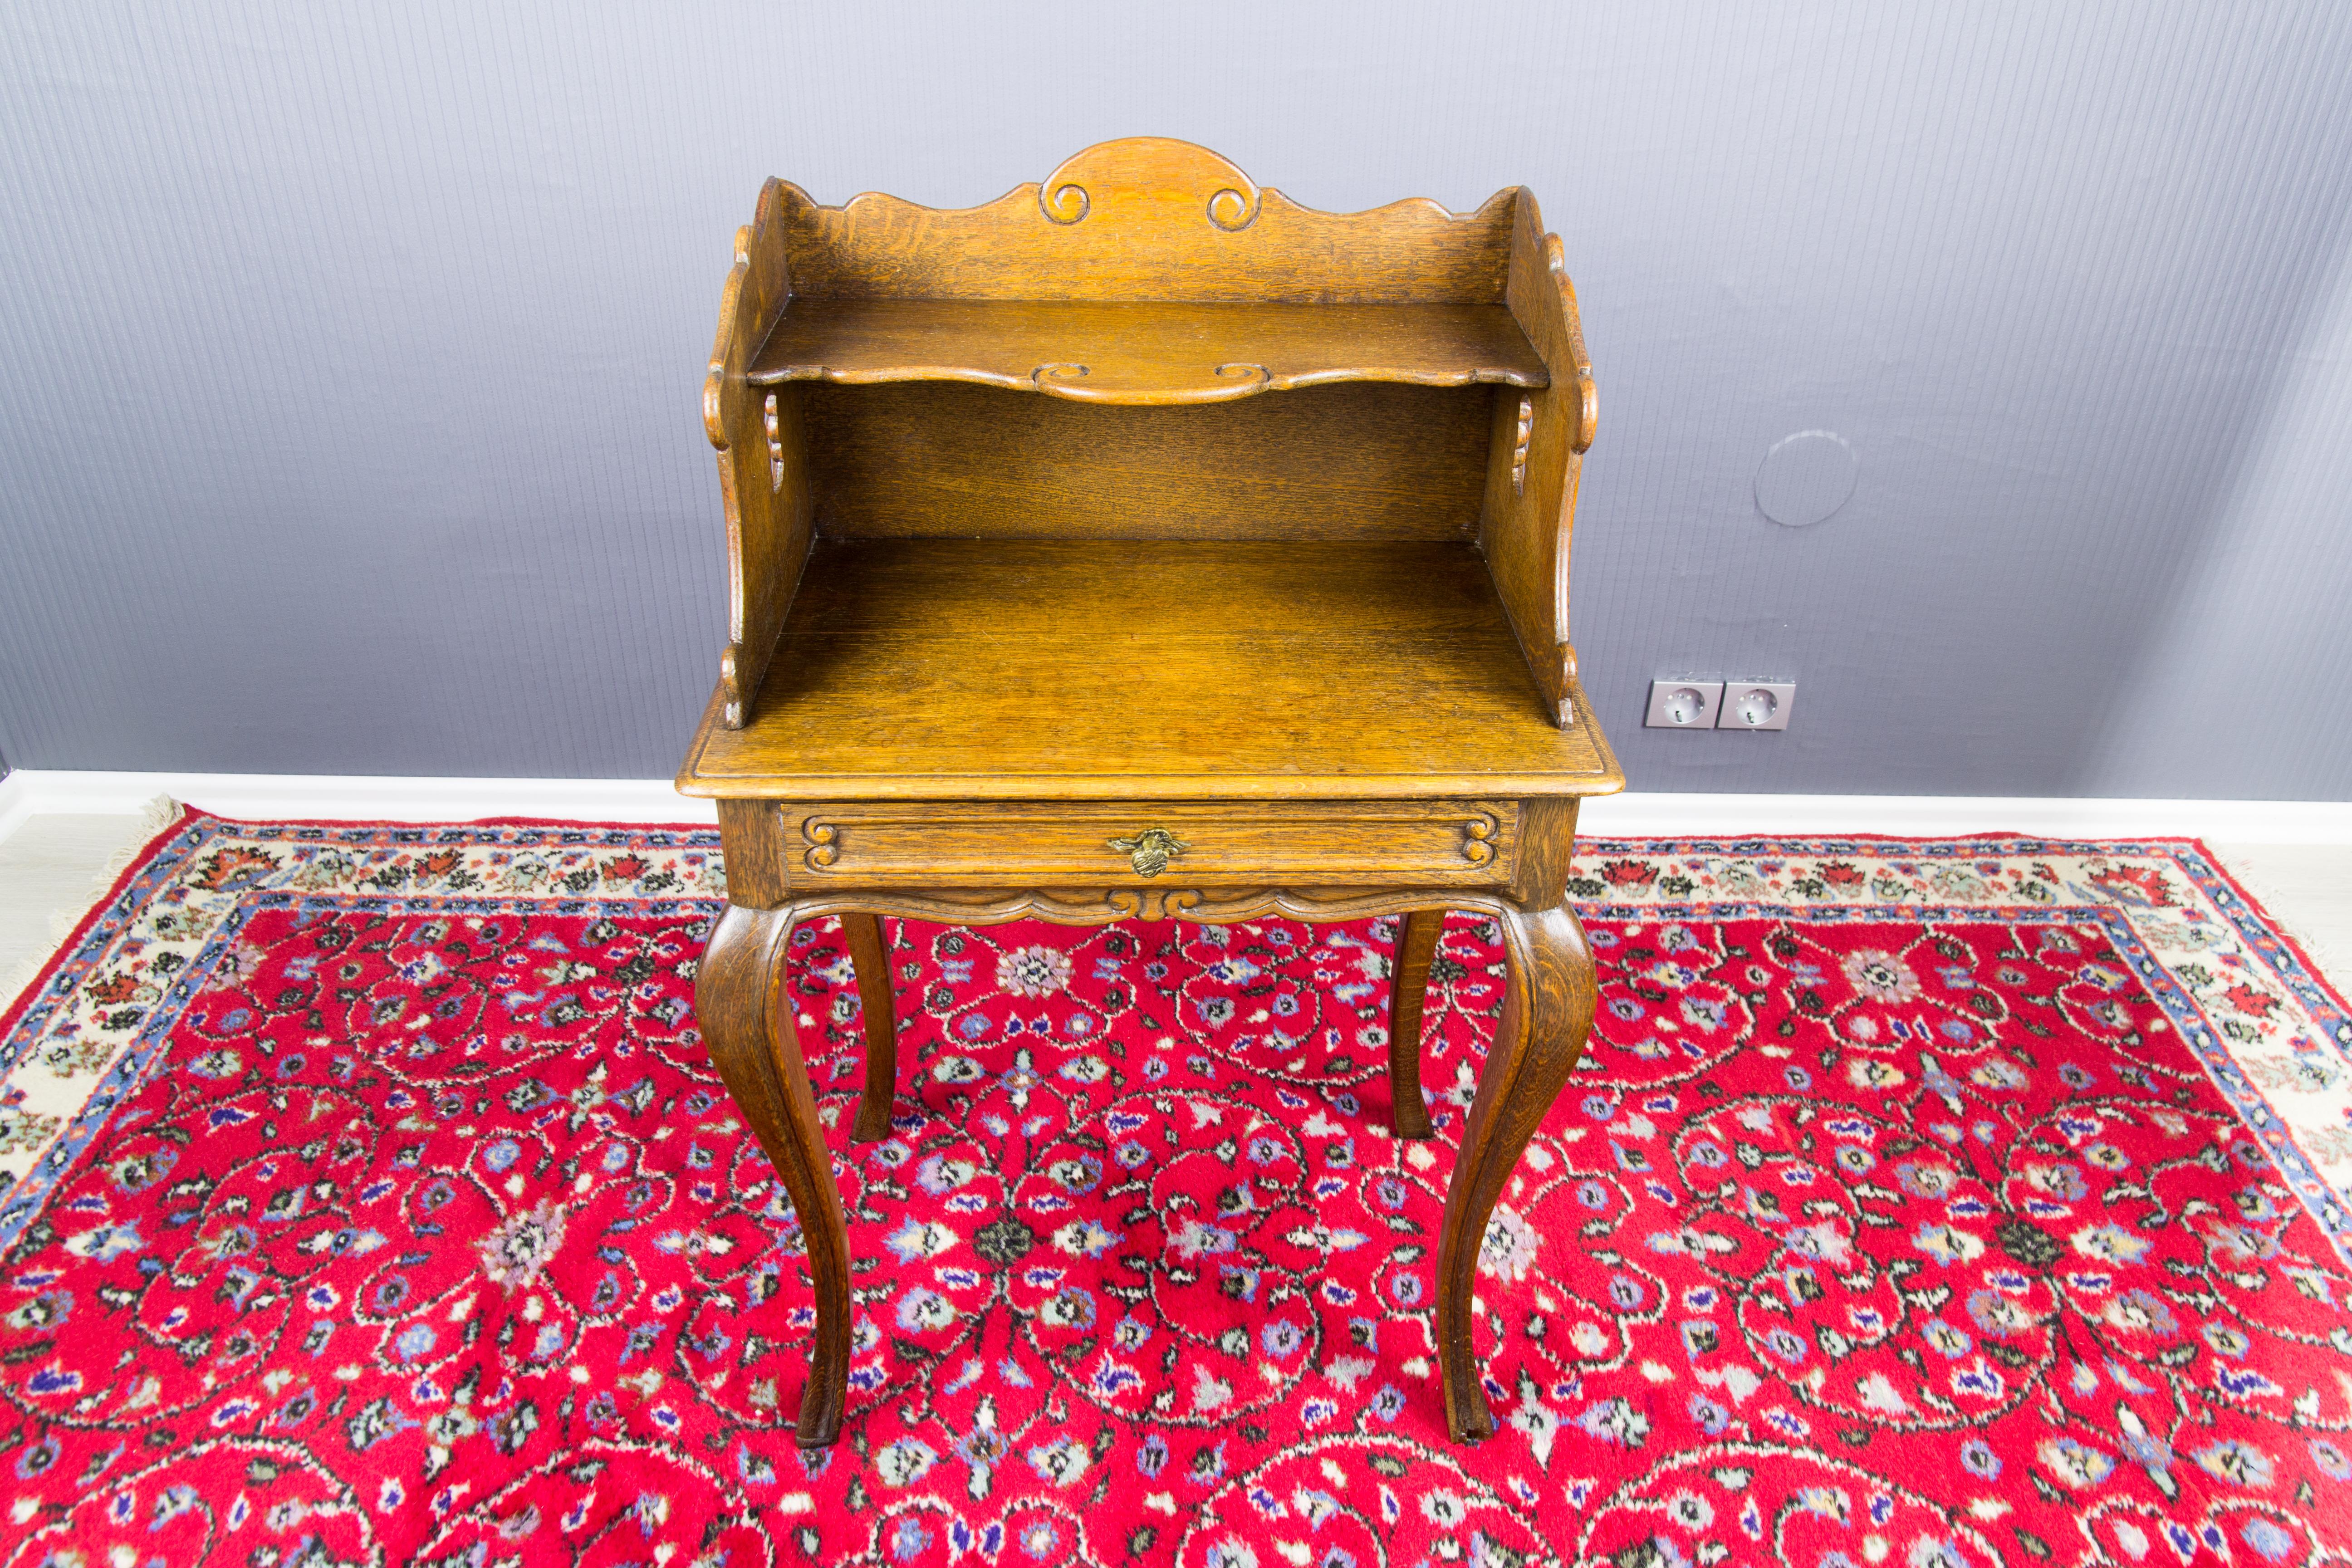 Charming French Louis XV style nightstand or side table made of oak. The scalloped top shelf above open recess with a single drawer. Raised on graceful cabriole legs.
Dimensions: height 78 cm / 30.7 in; width 50 cm / 19.68; depth 34 cm / 13.38 in.